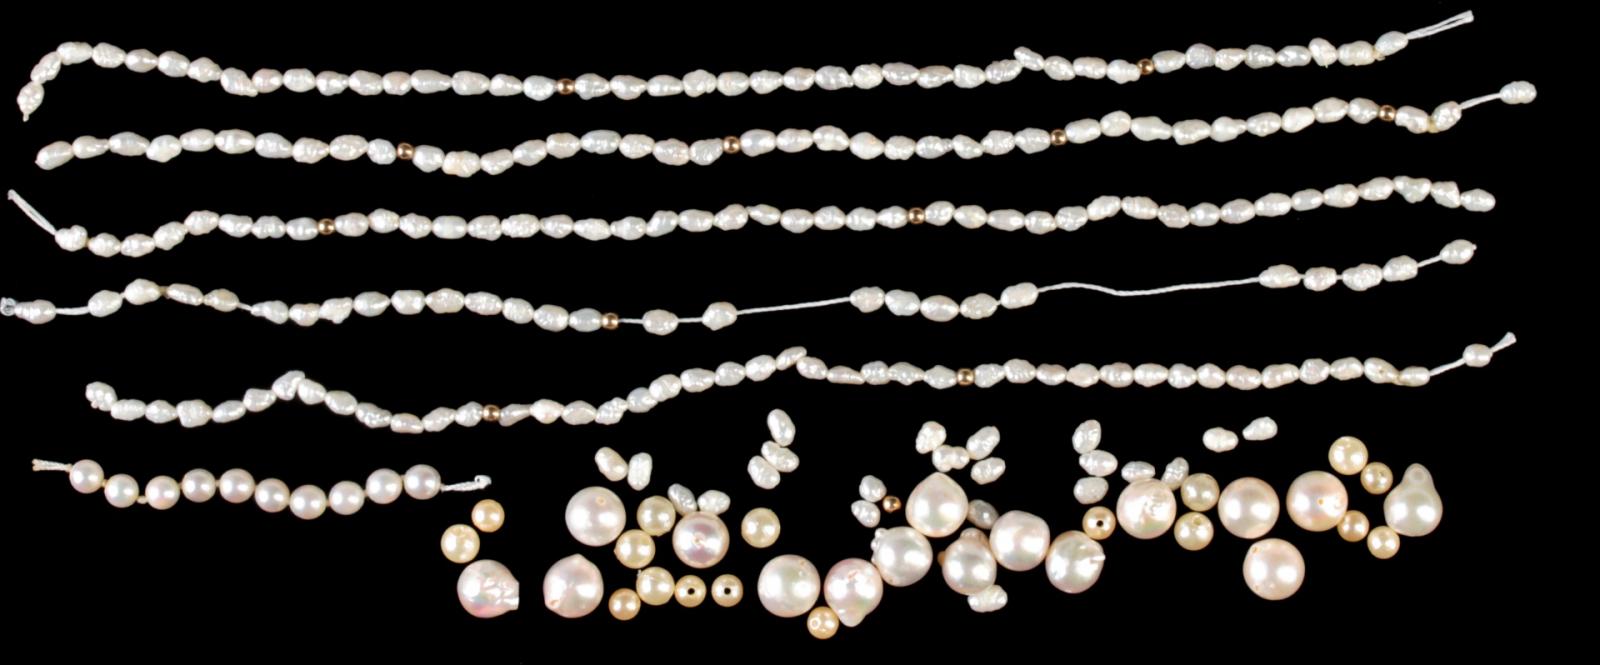 LOOSE BAROQUE AND FRESH WATER PEARLS